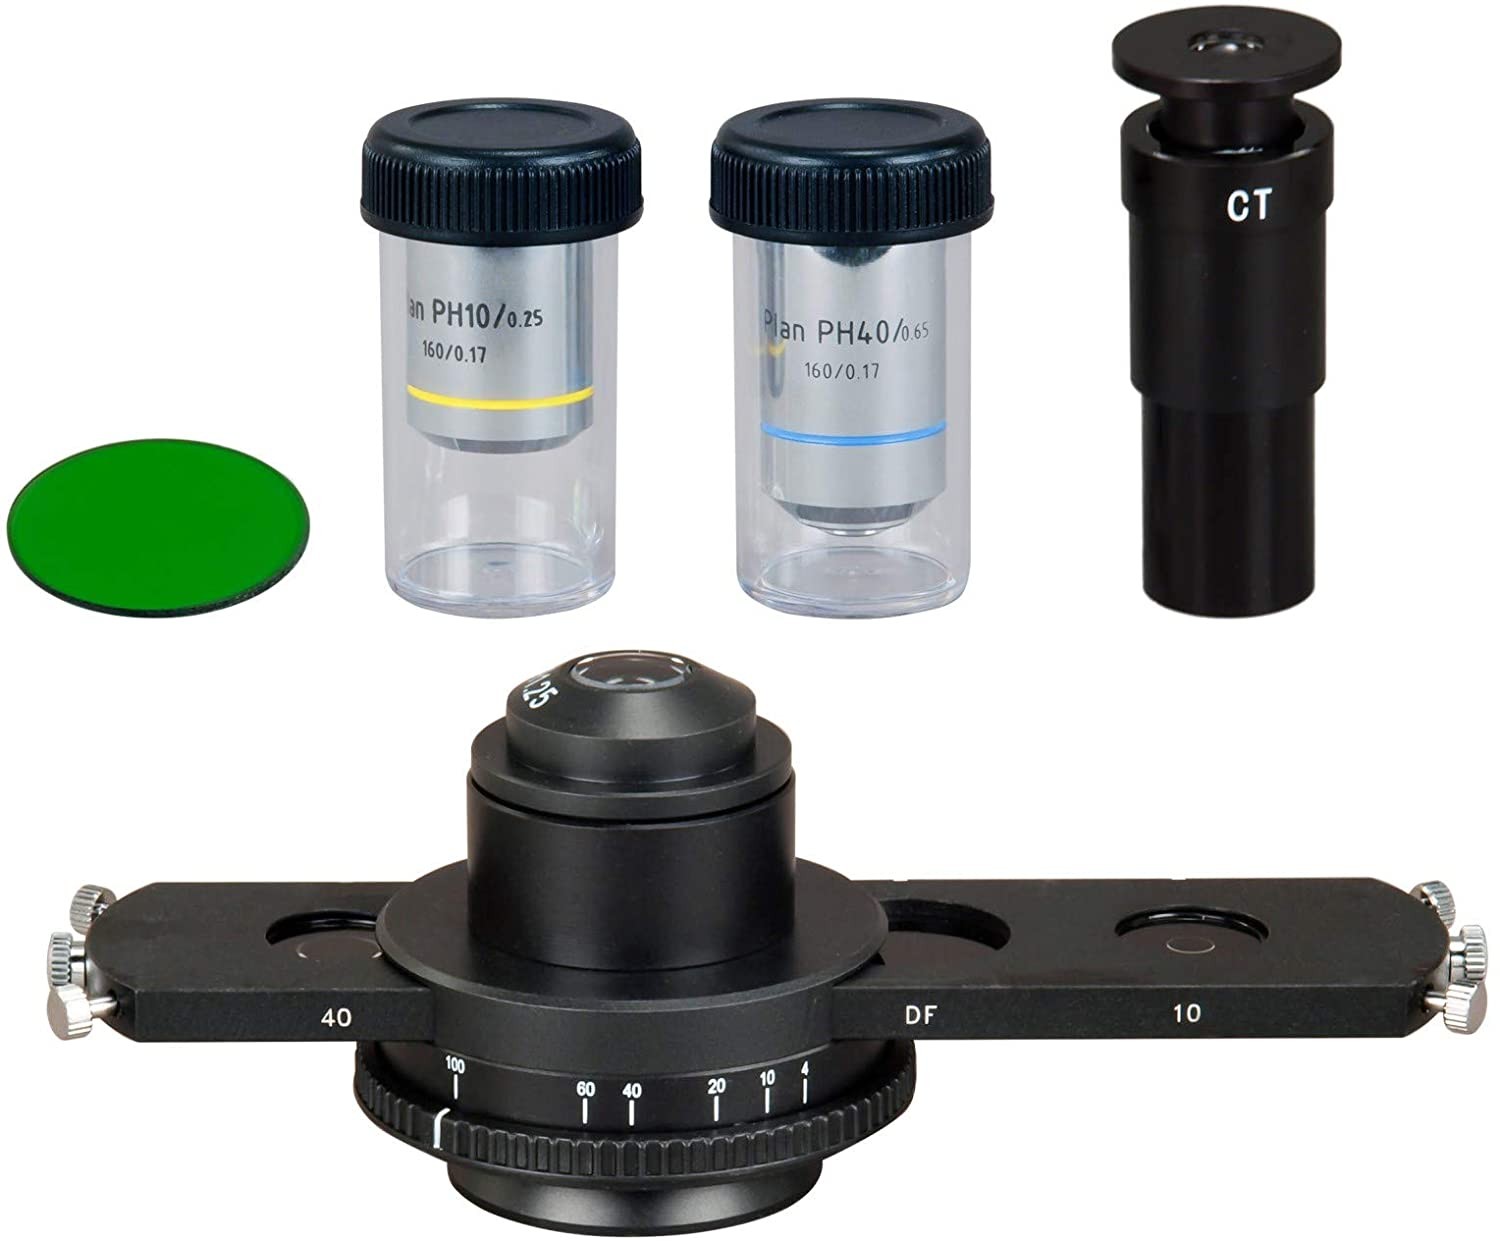 Brightfield and Darkfield Phase Contrast Kit for Compound Microscope 